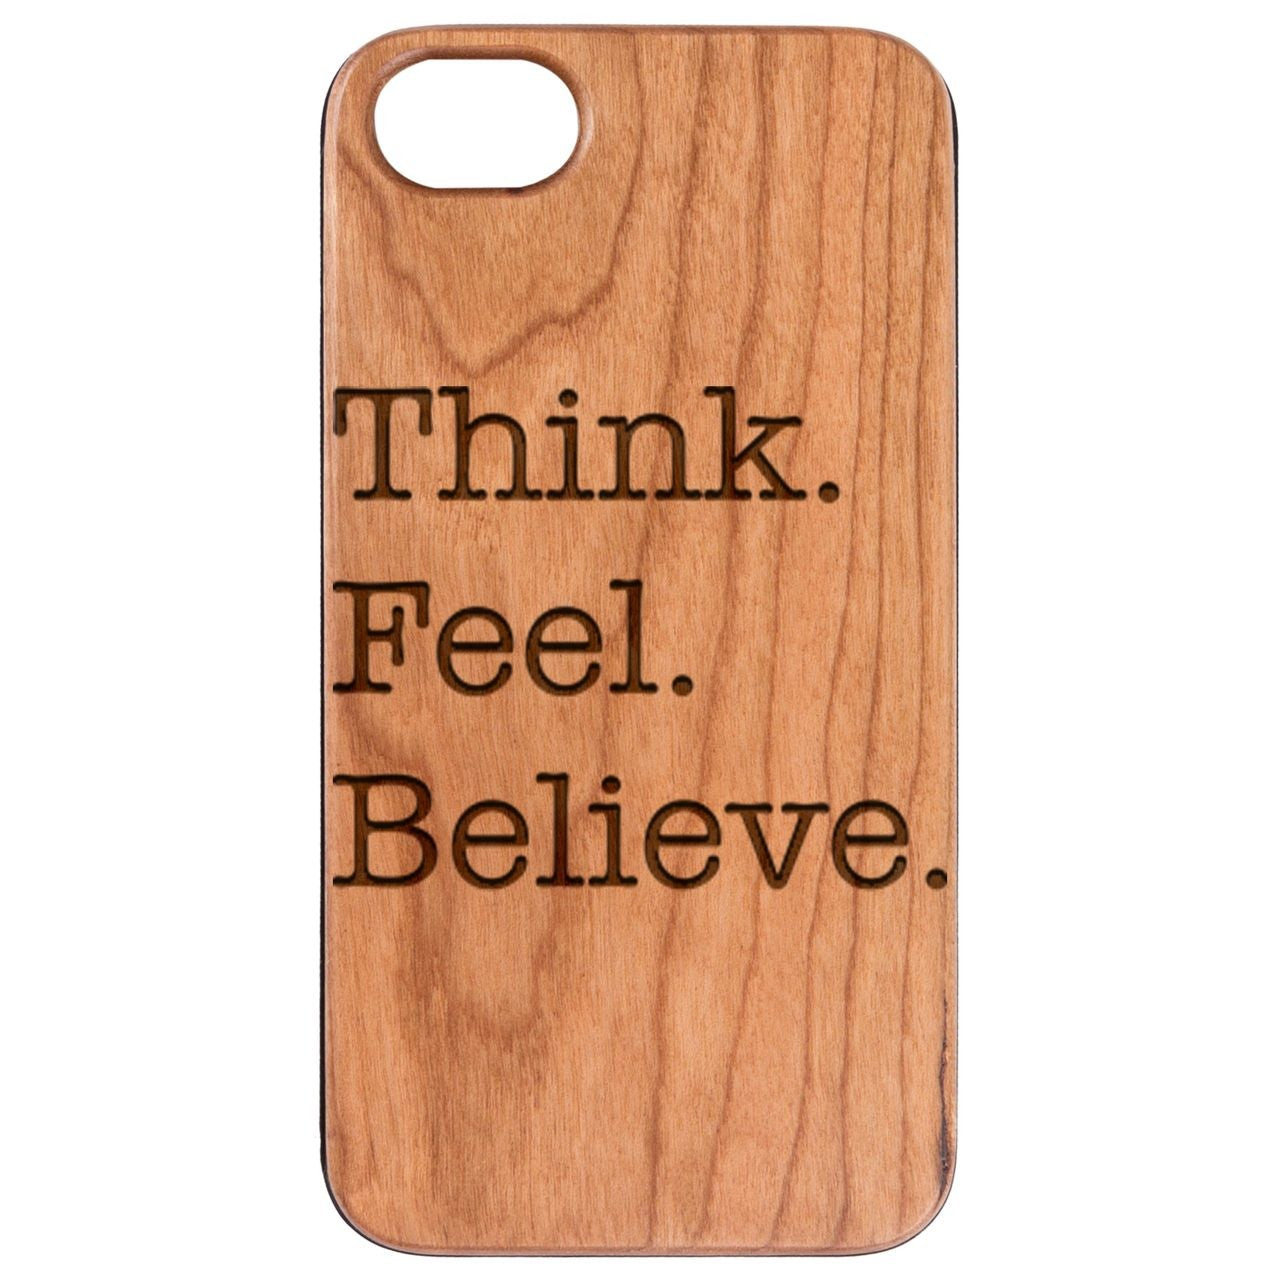  Think Feel Believe - Engraved - Wooden Phone Case - IPhone 13 Models